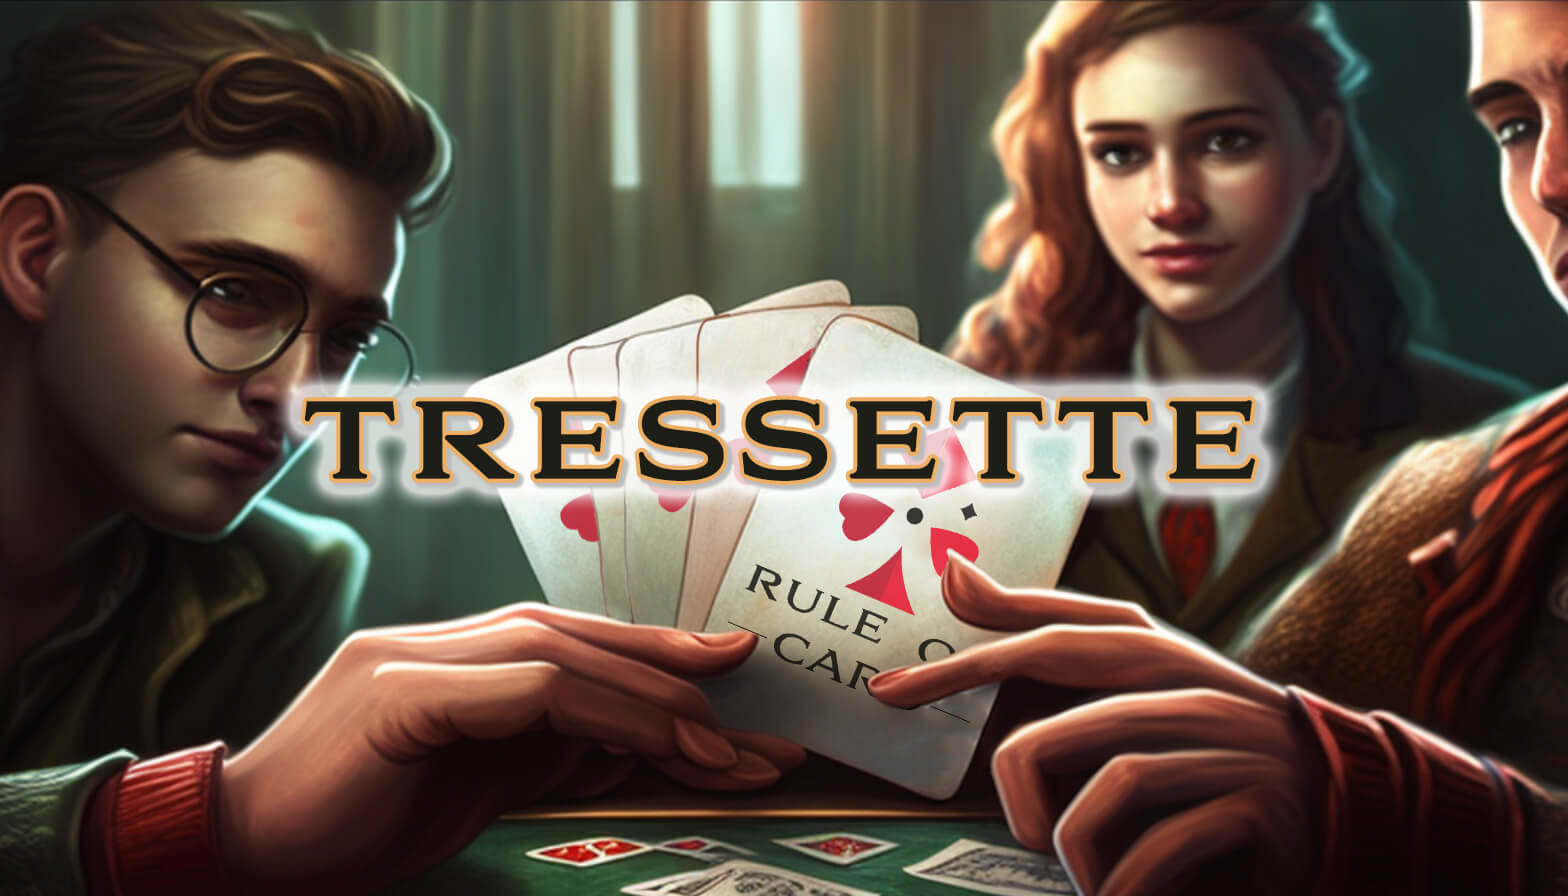 Playing the card game Tressette